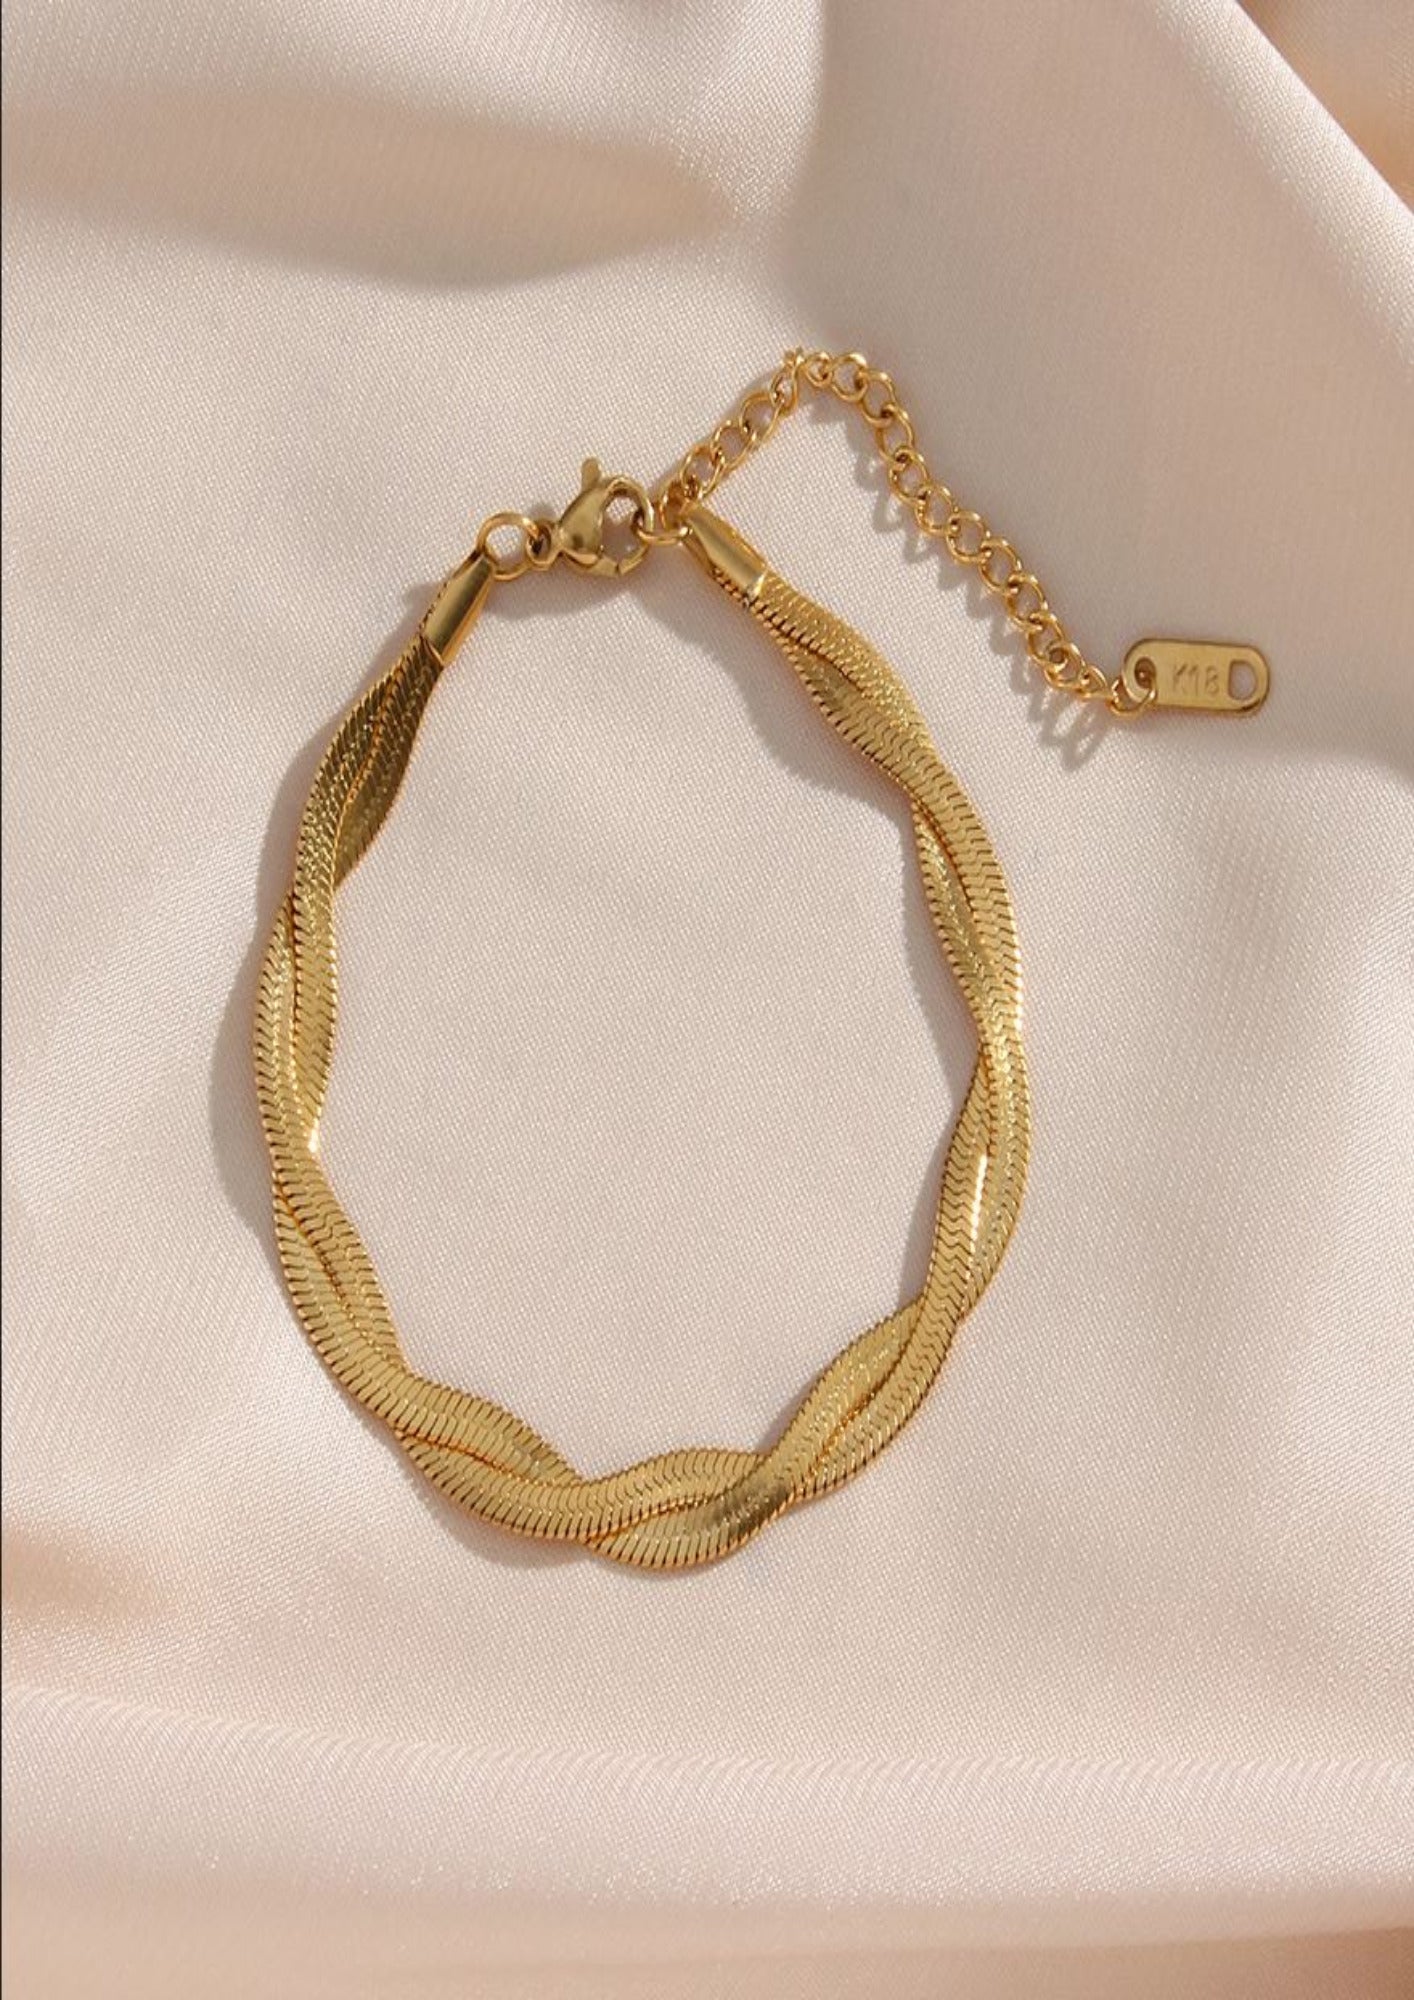 Special-interest Design Clavicle Chain Two-strand Weaving braclet Yubama Jewelry Online Store - The Elegant Designs of Gold and Silver ! 